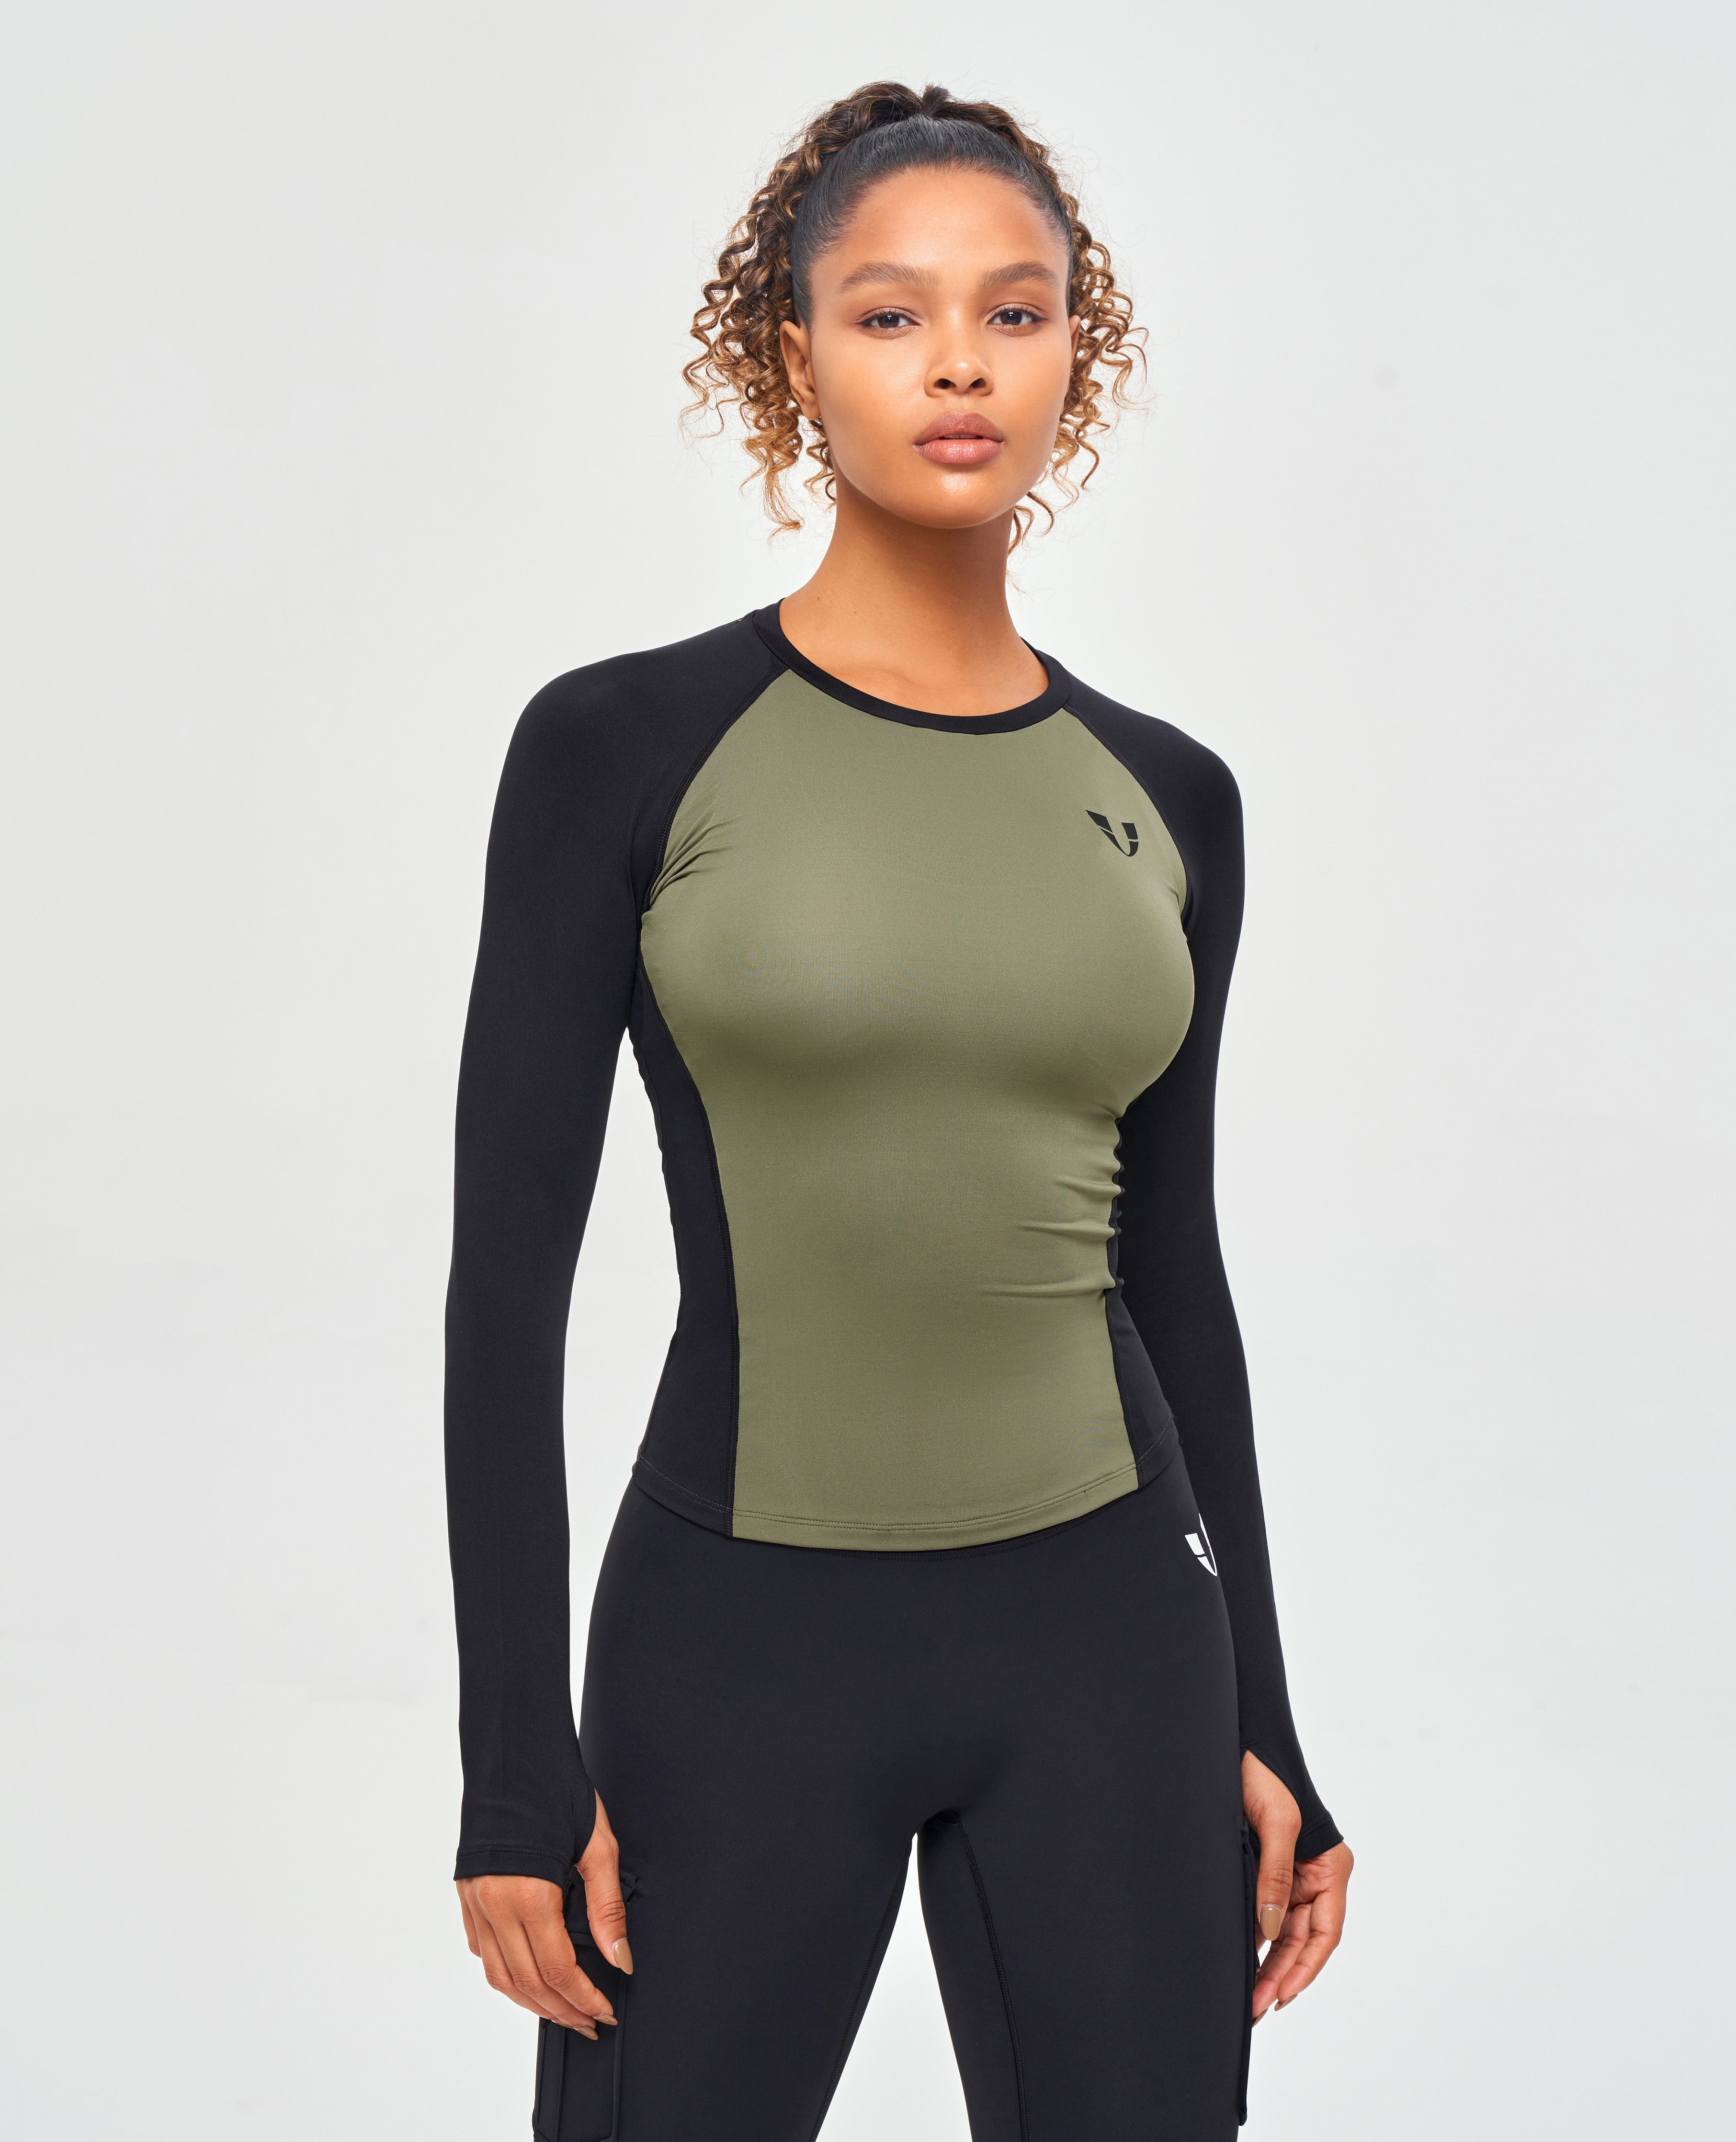 New Releases Activewear, Workout Clothes